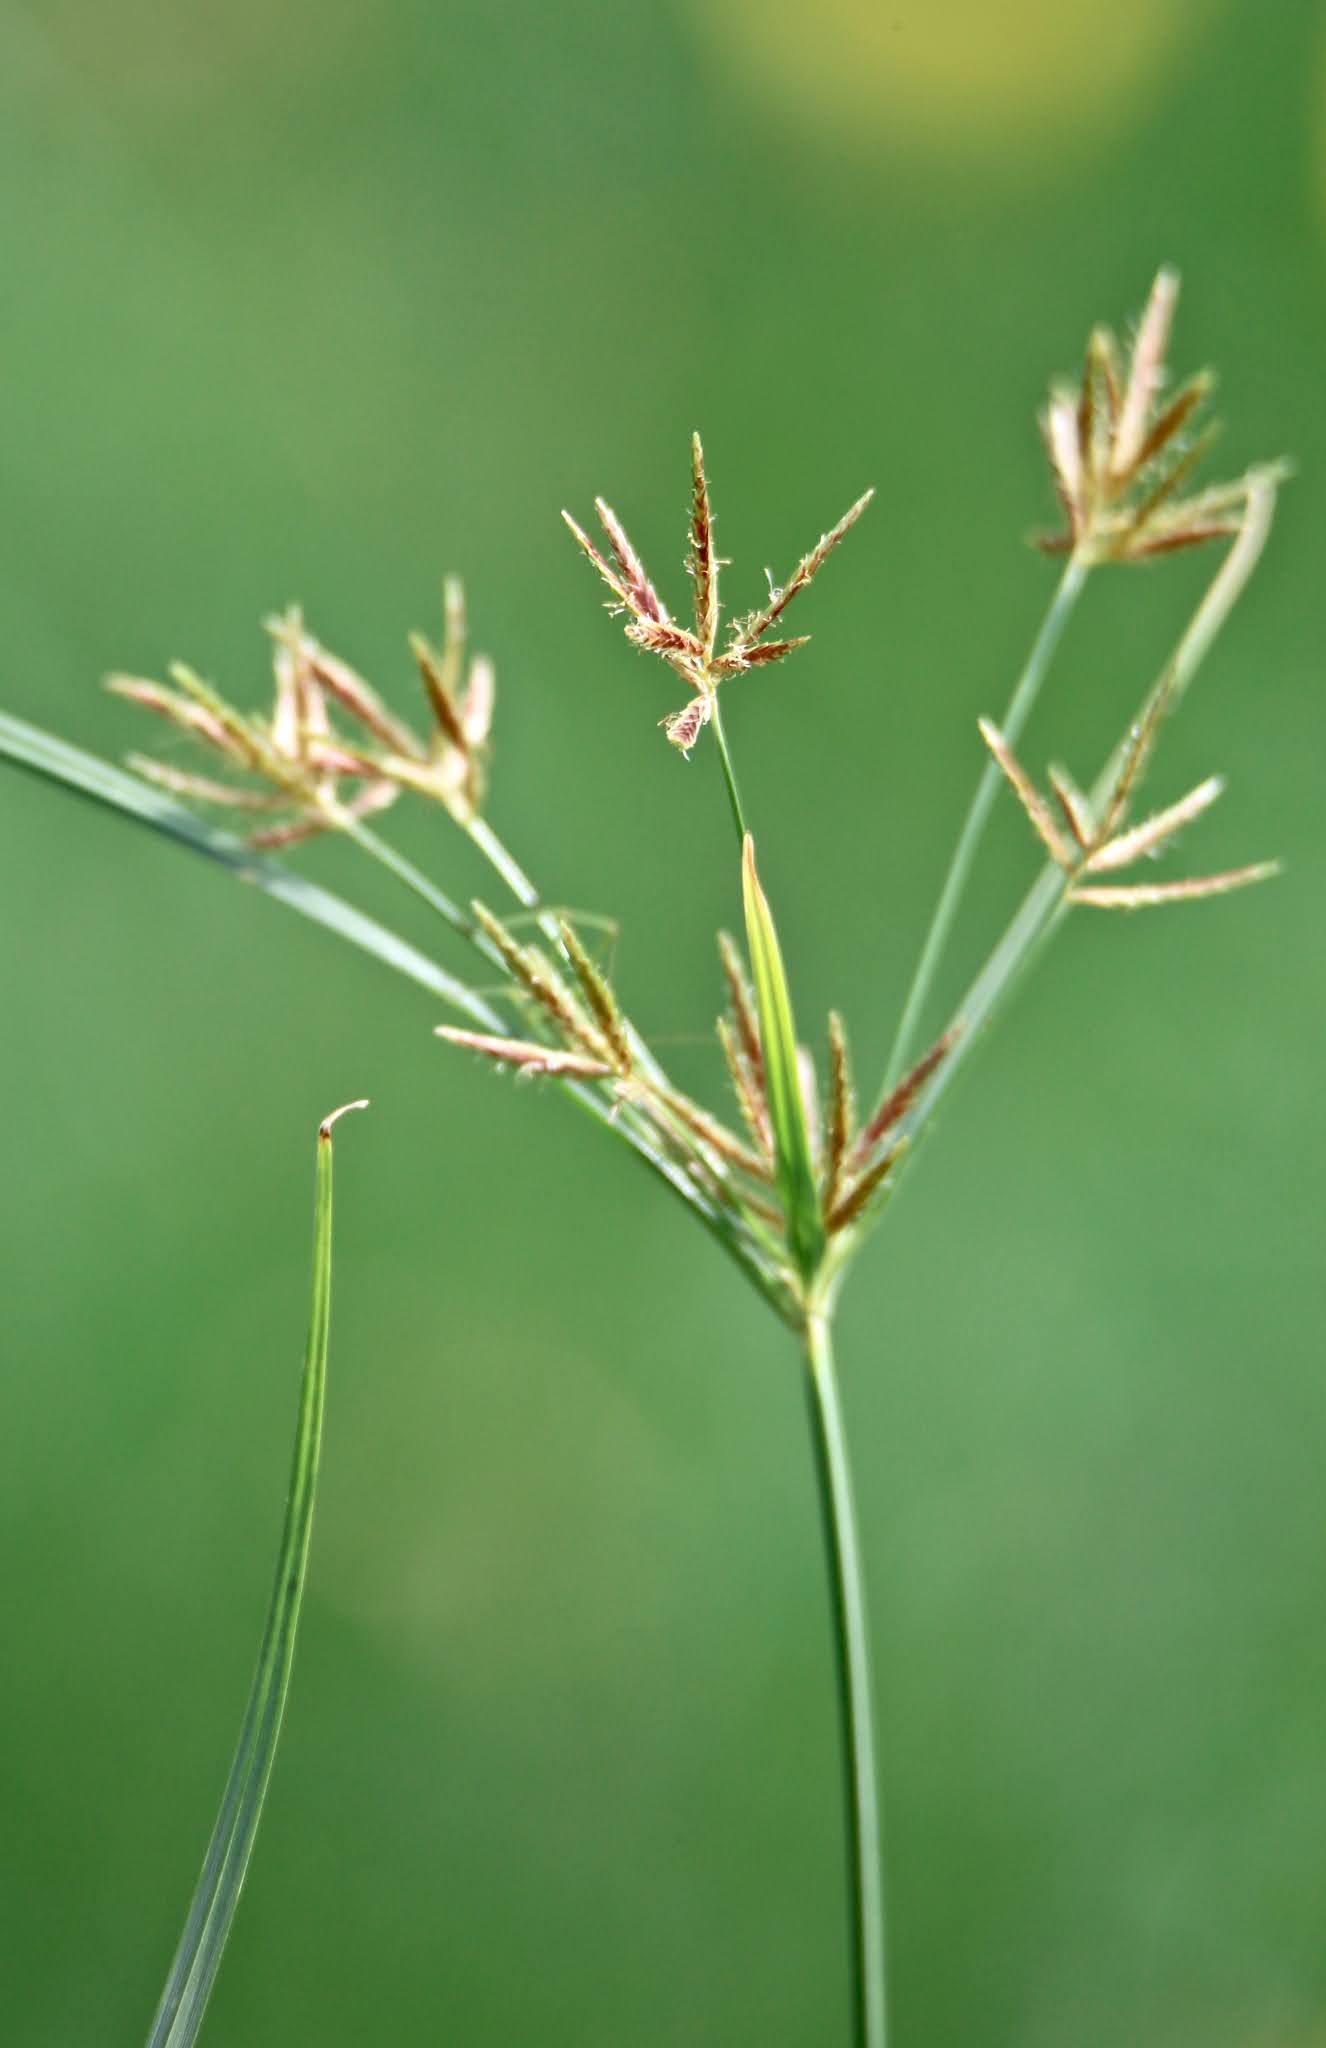 Nut grass weed high resolution free